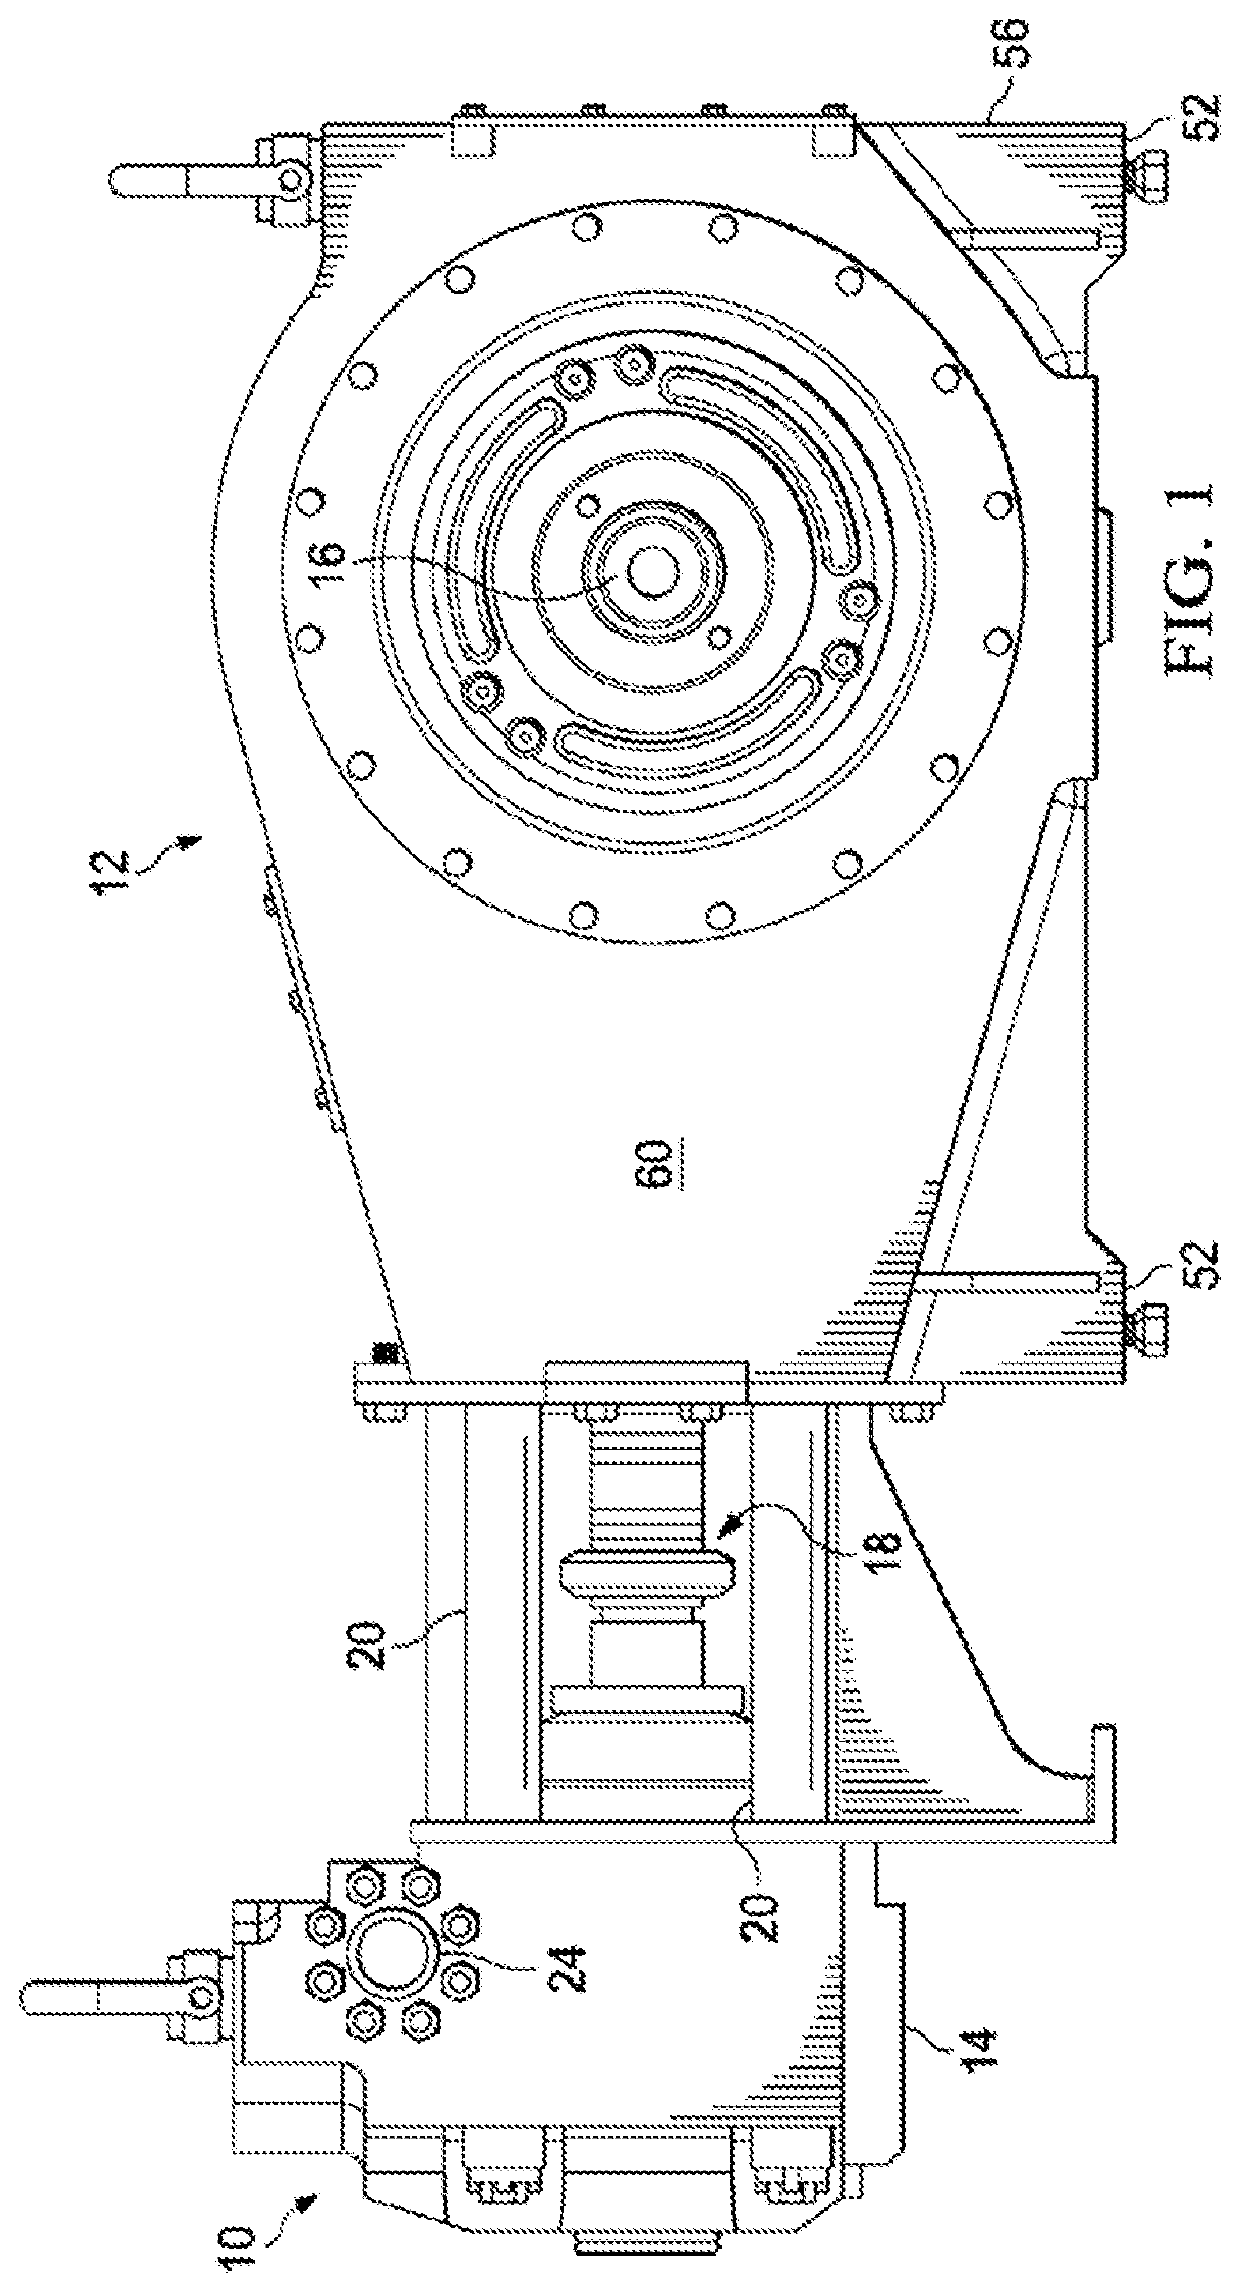 Support for Reciprocating Pump